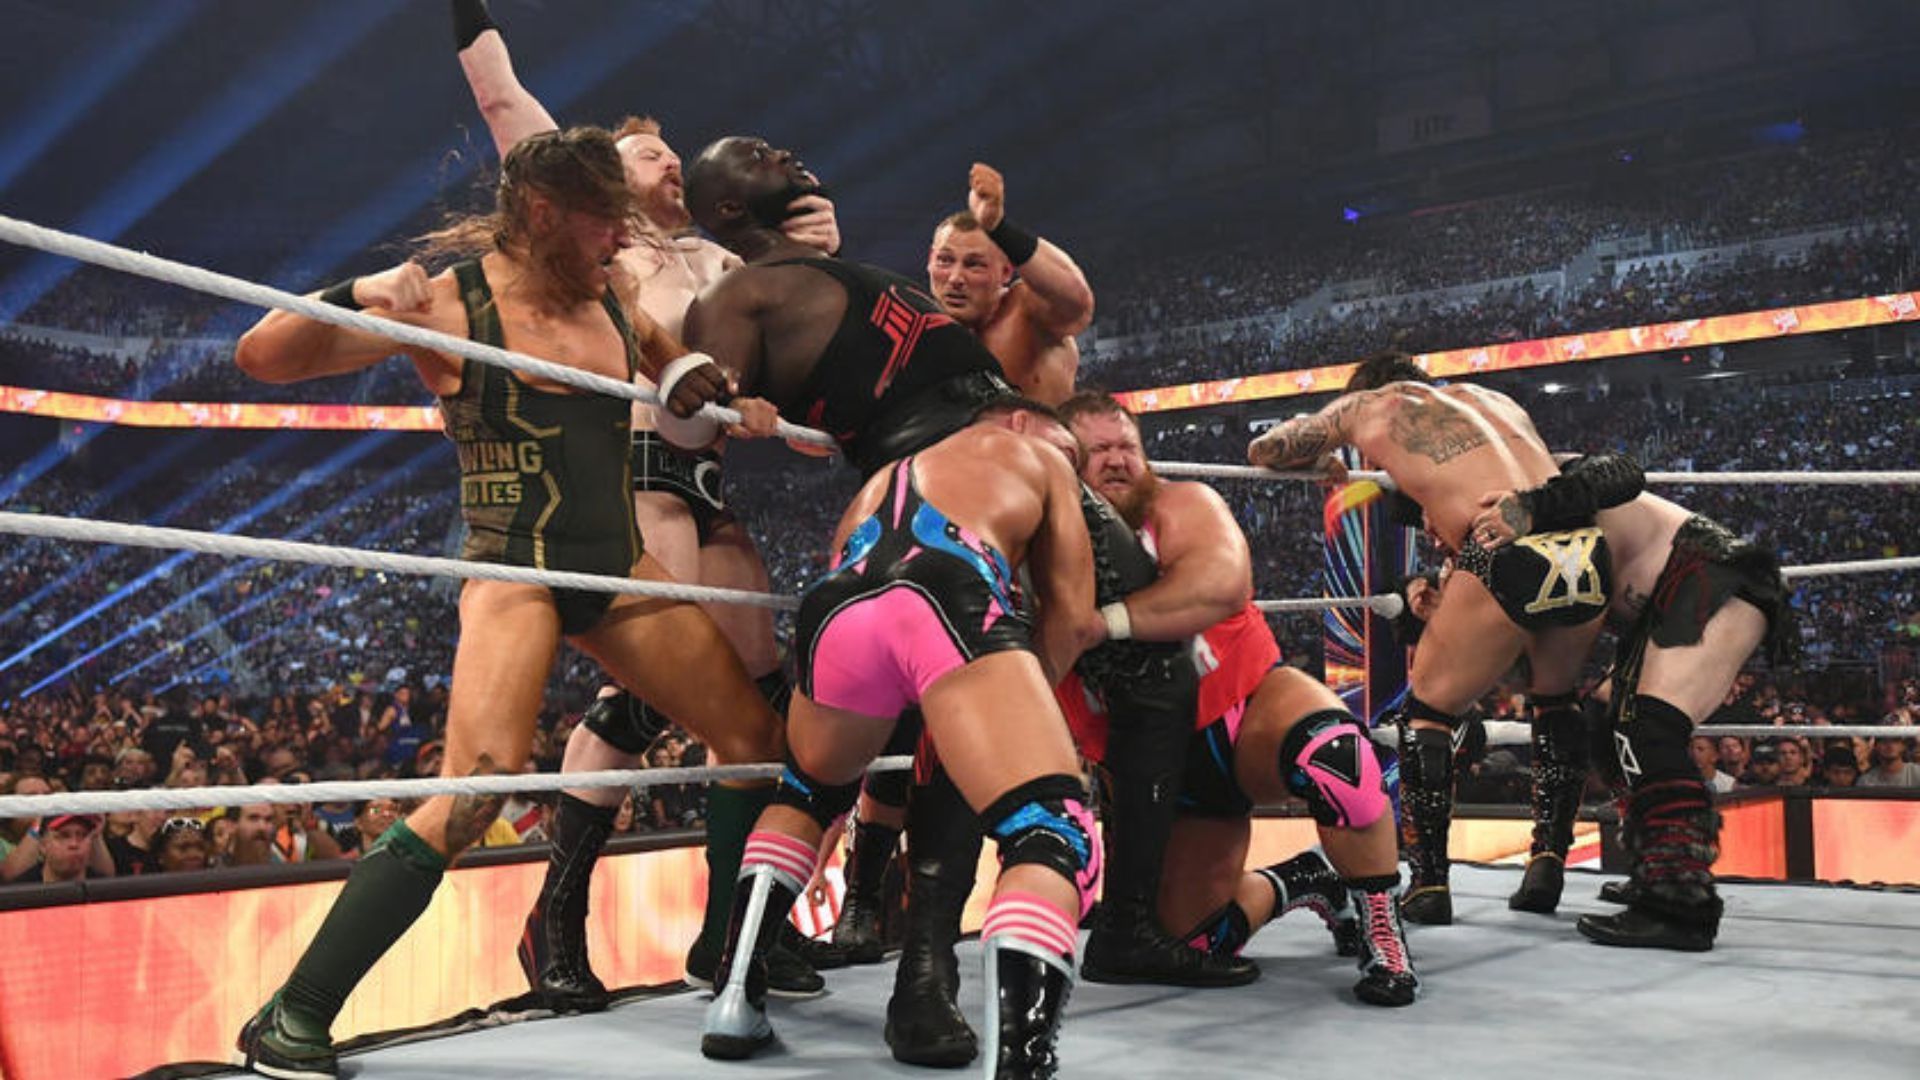 Omos came up short in the SummerSlam Battle Royal